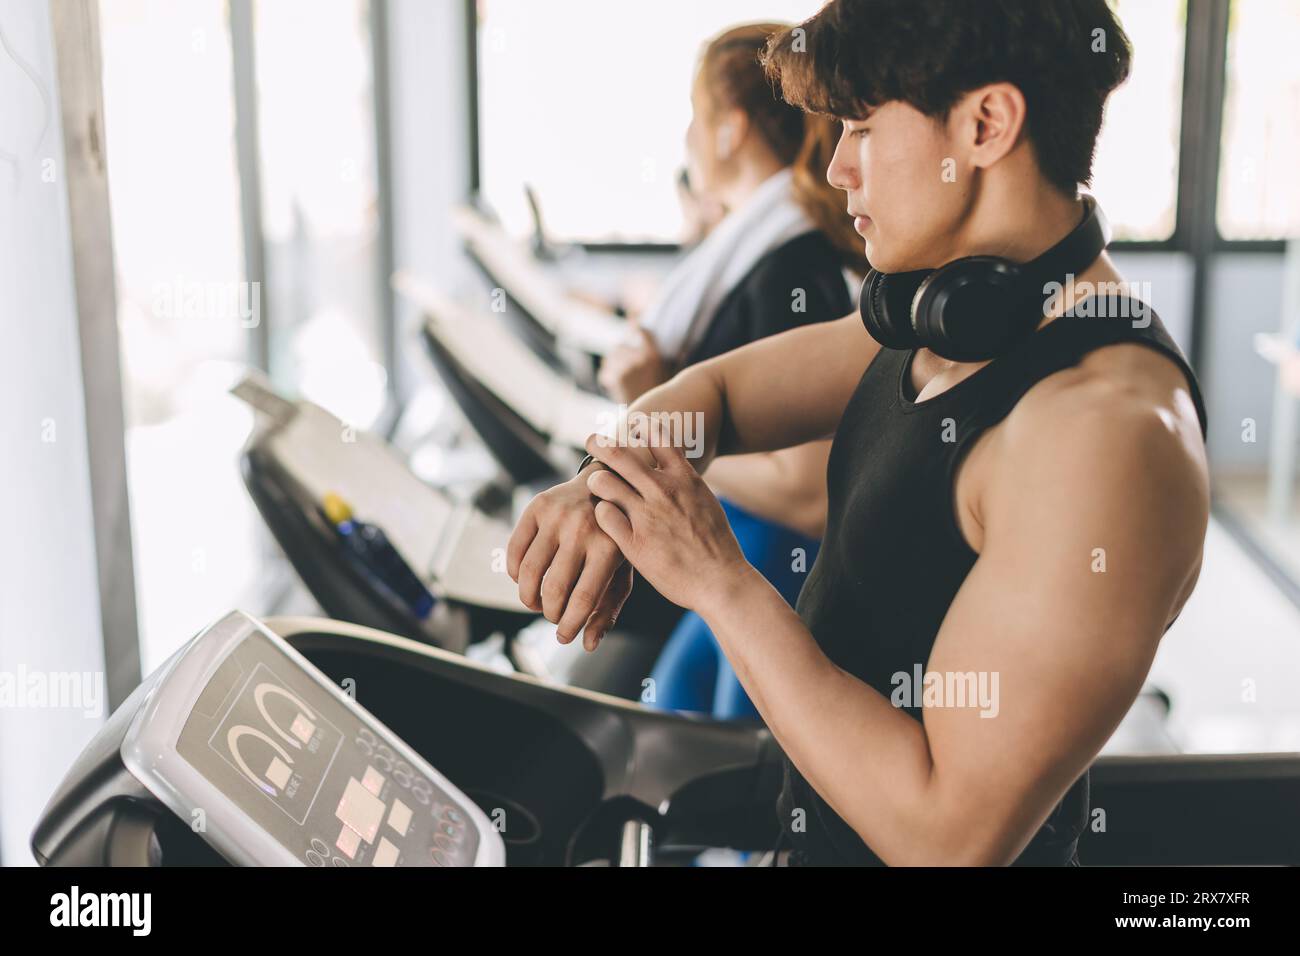 People running on a treadmill in health club using Smart Watch tracking pulse and training time for health goal Stock Photo